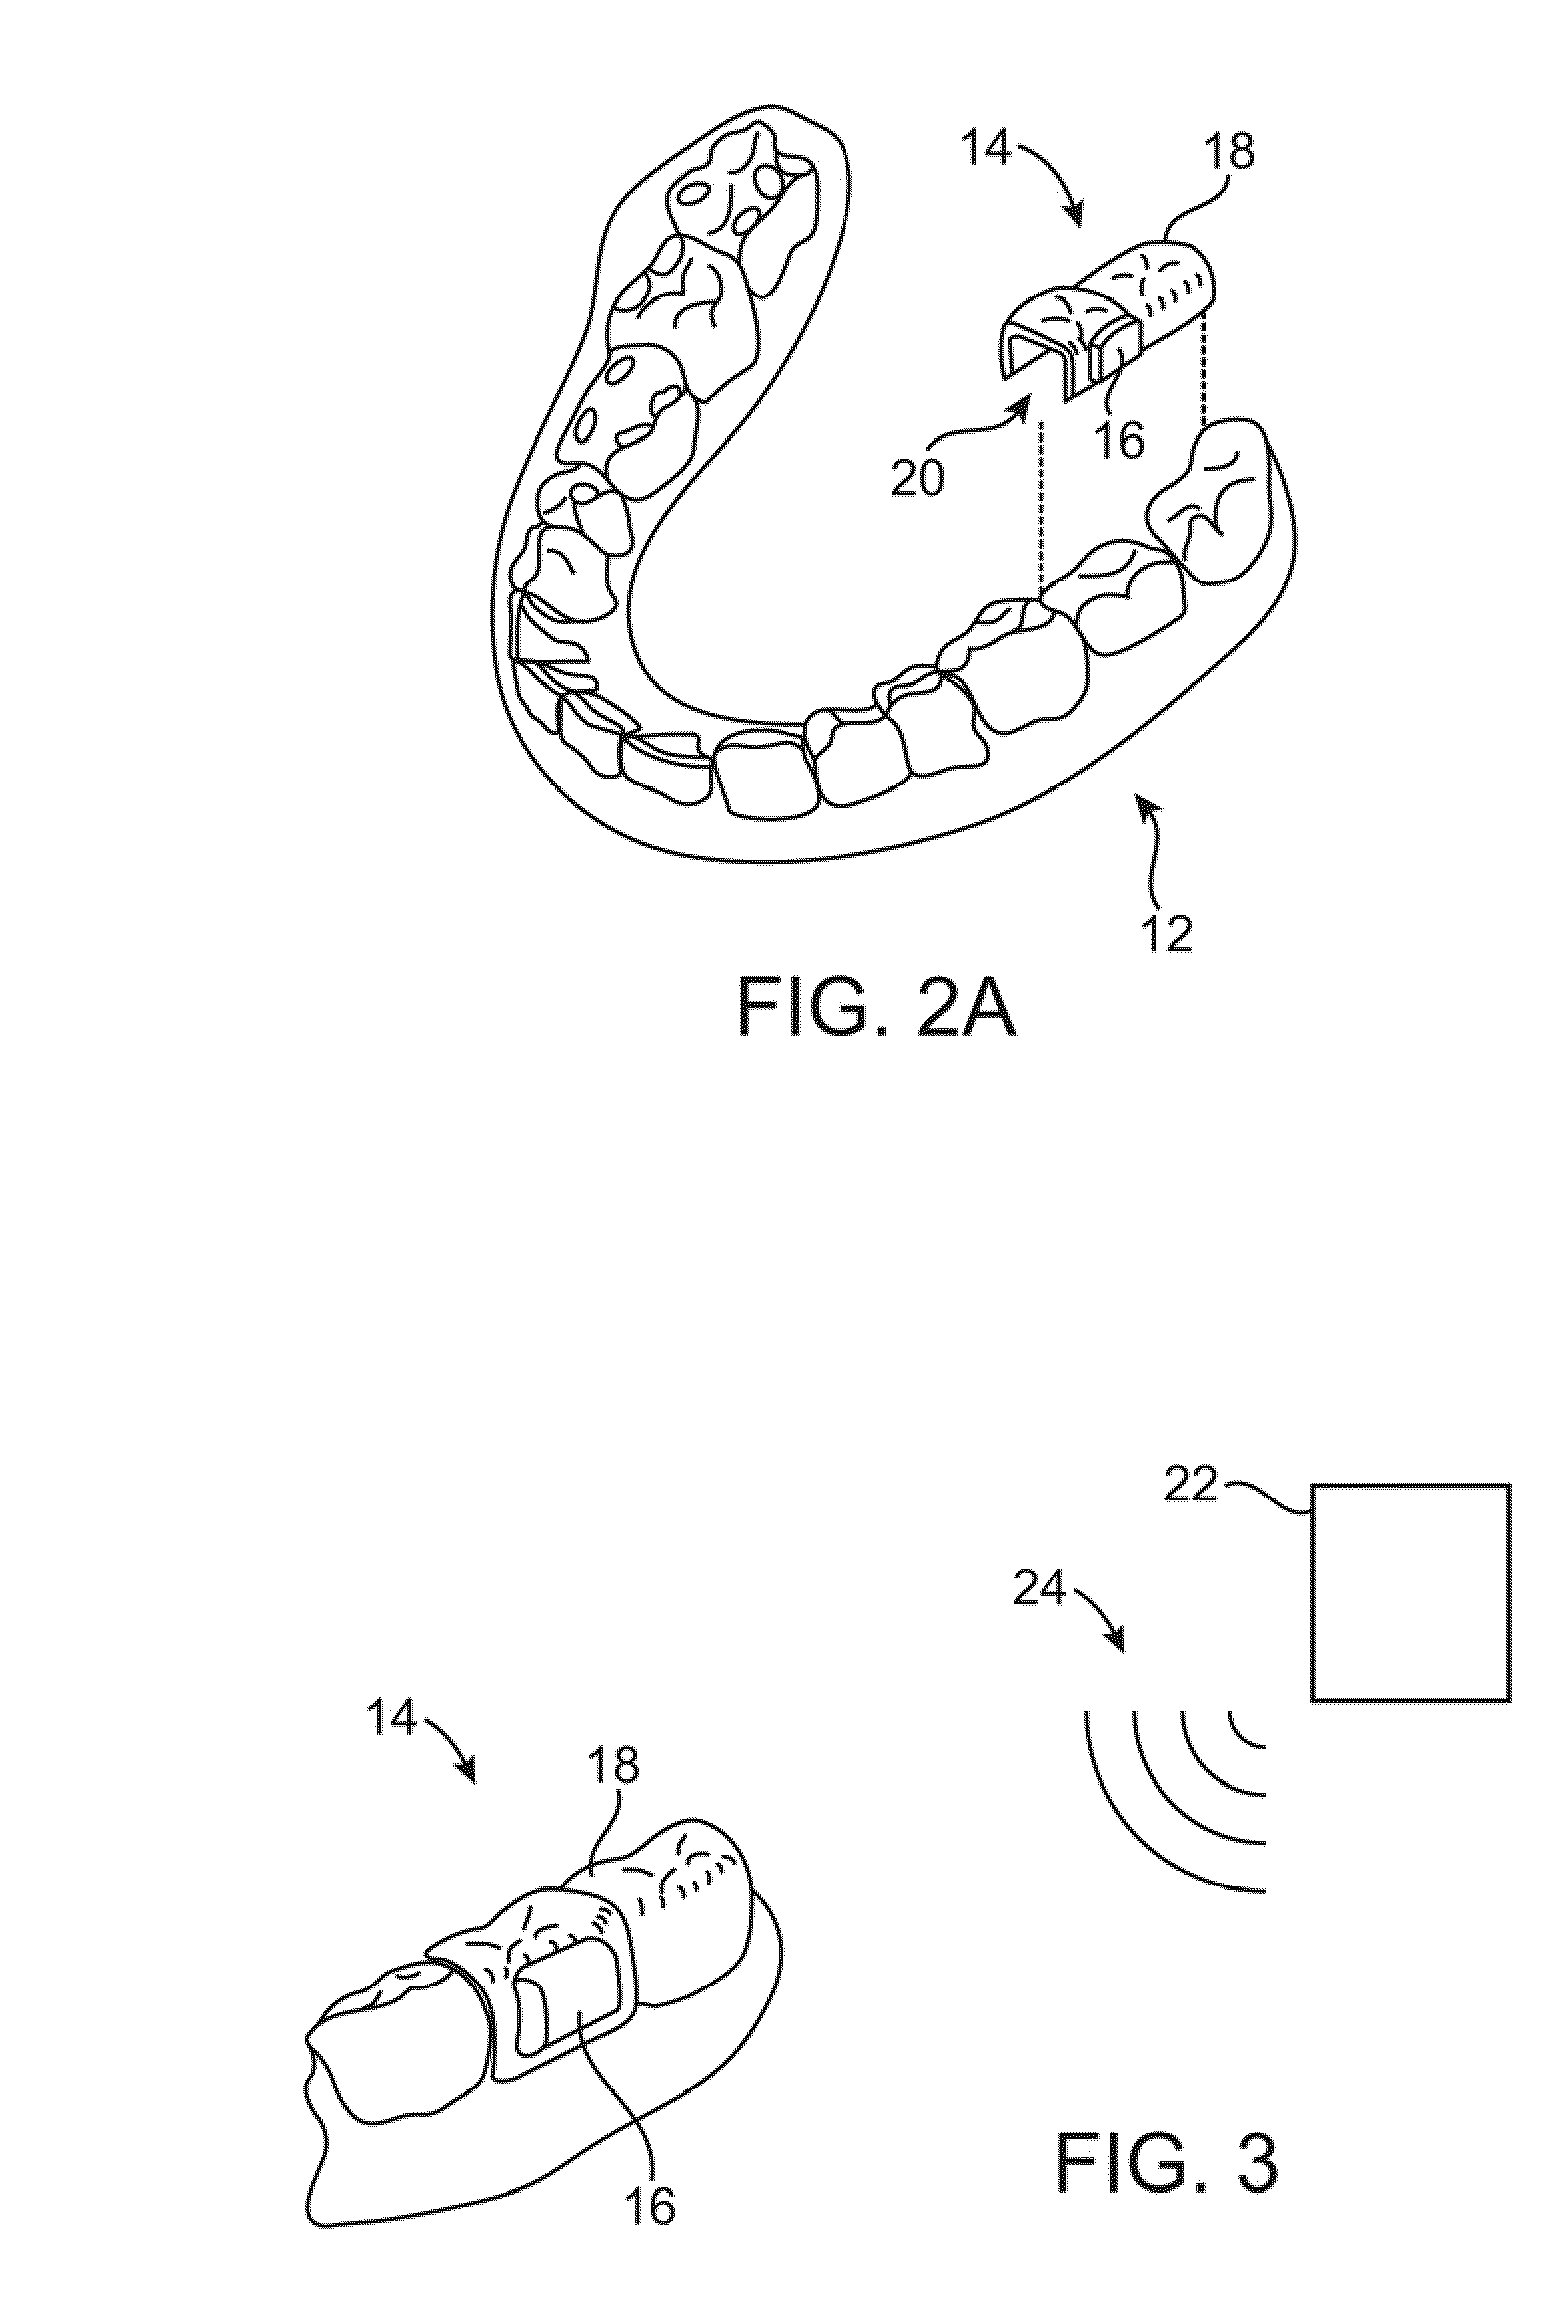 Microphone placement for oral applications